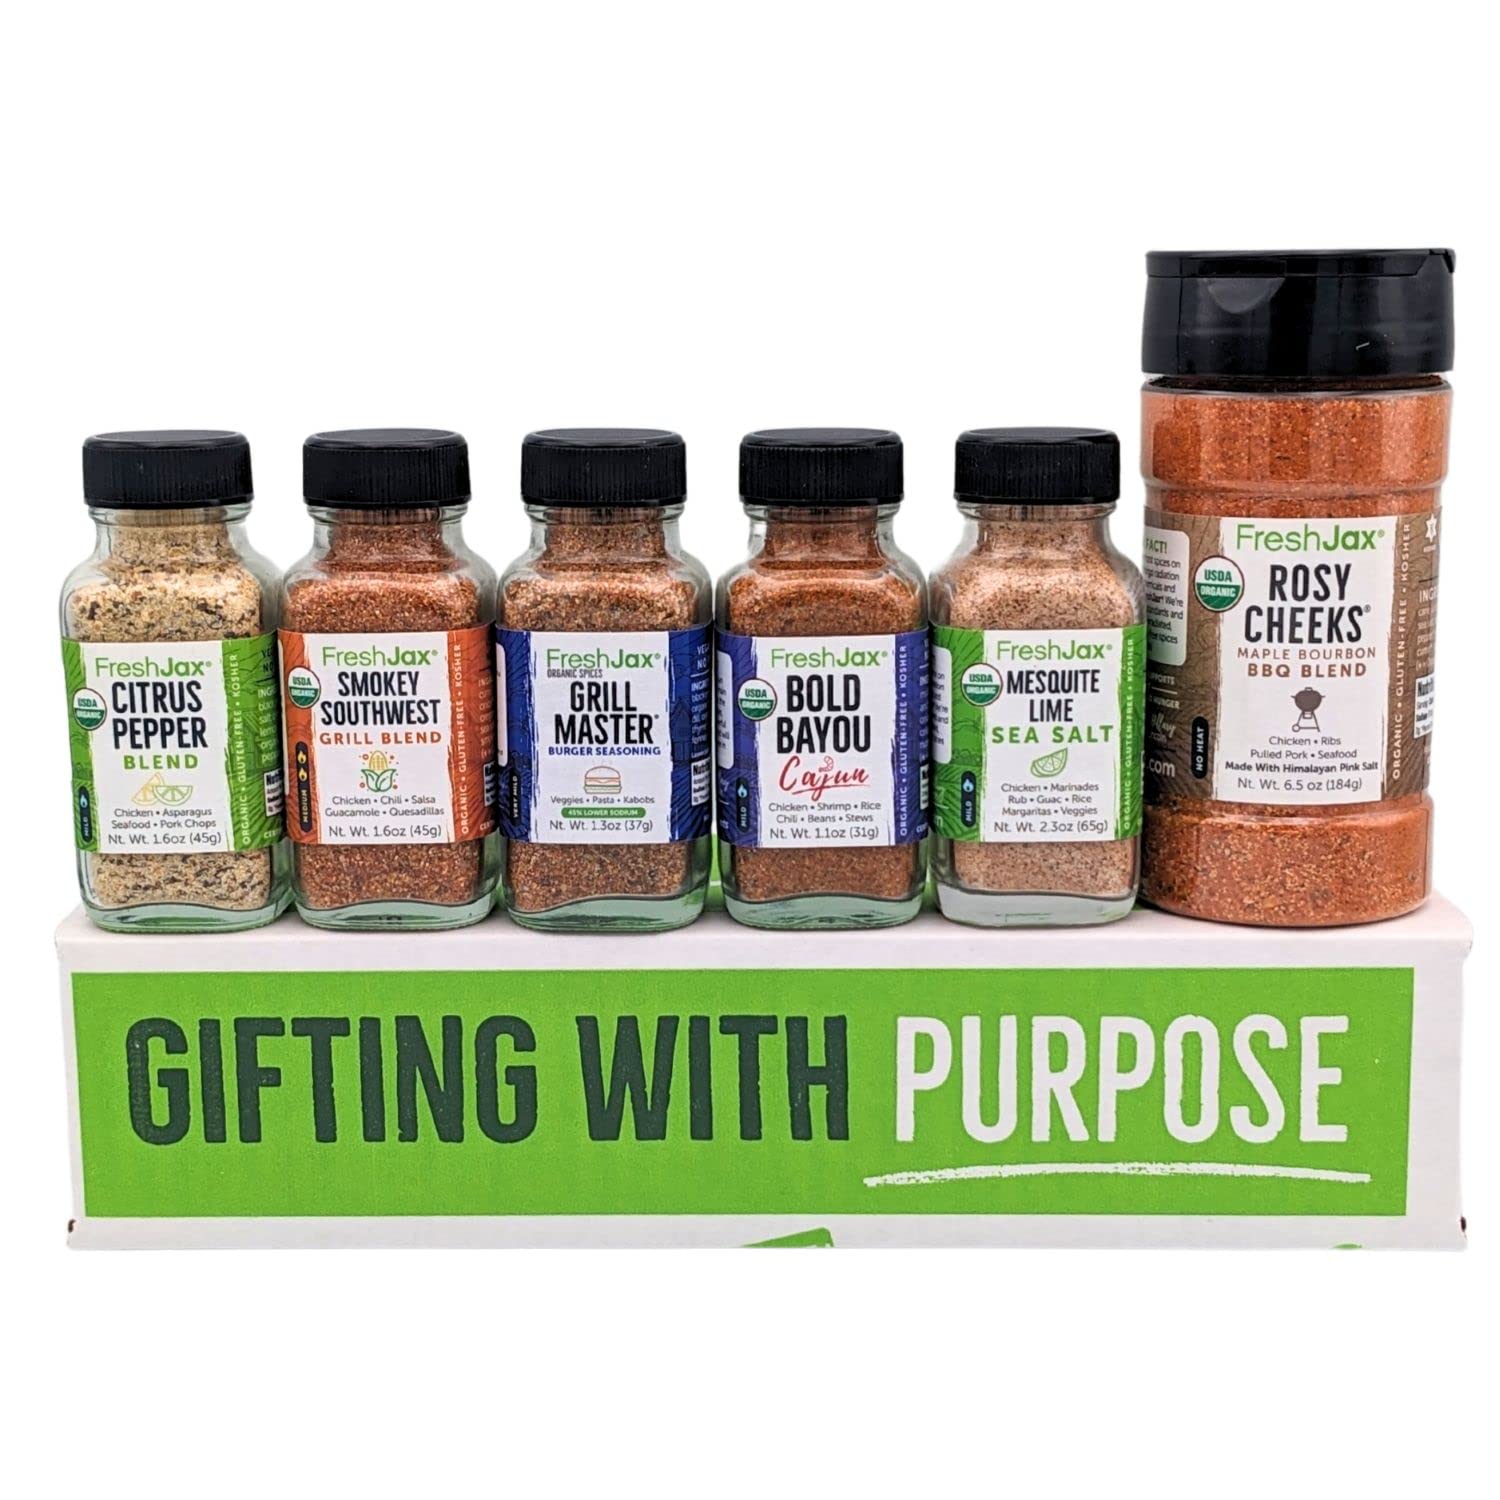 FreshJax Organic Spices | BBQ & Grill Lovers Gift Set | Includes 6 Seasoning Blends | 1 Large and 5 Sampler Size | Plant-Based, Gluten-Free, Certified Kosher, Certified Organic